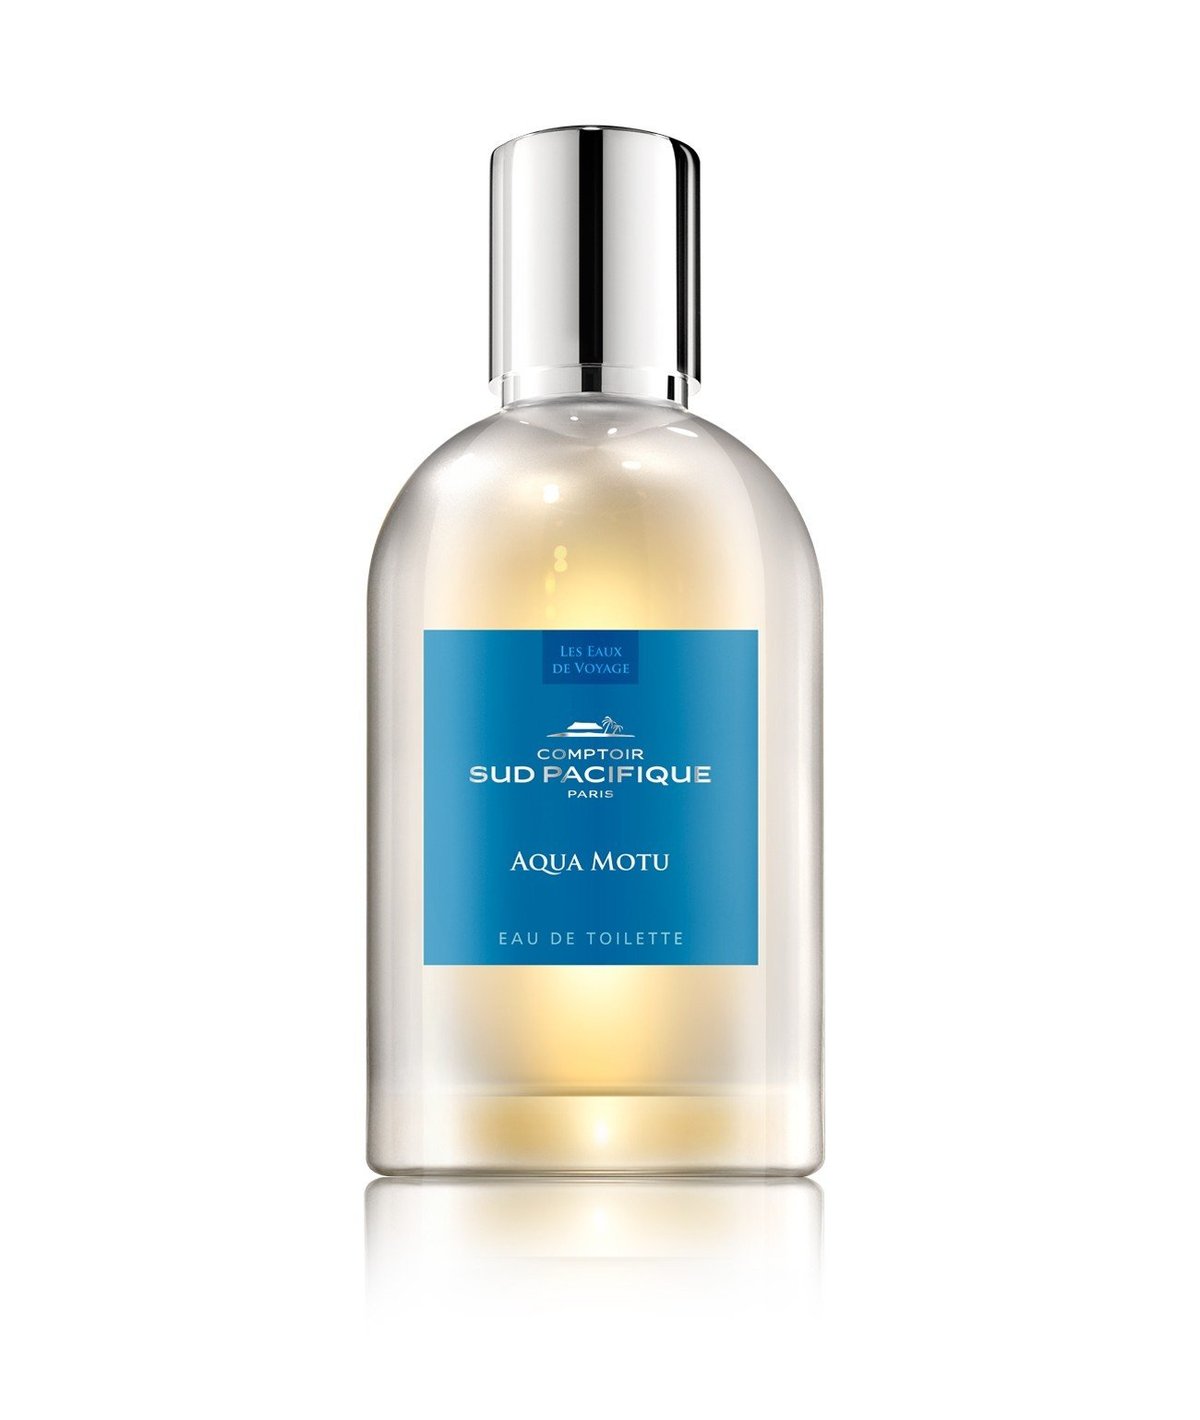 DESCRIPTION A fresh breeze coming from the high seas blends the invigorating ocean odor and the caressing and discreet warm sand note.  NOTES Head Notes: Helychrisum. Heart Notes: Ocean accord, Lily of the valley, Warm sand. Base Notes: Fucus.   Ingredients : ALCOHOL DENAT. / S.D. ALCOHOL 39C., PARFUM / FRAGRANCE, AQUA / WATER, BENZYL SALICYLATE, COUMARIN, BENZYL BENZOATE, BENZYL ALCOHOL